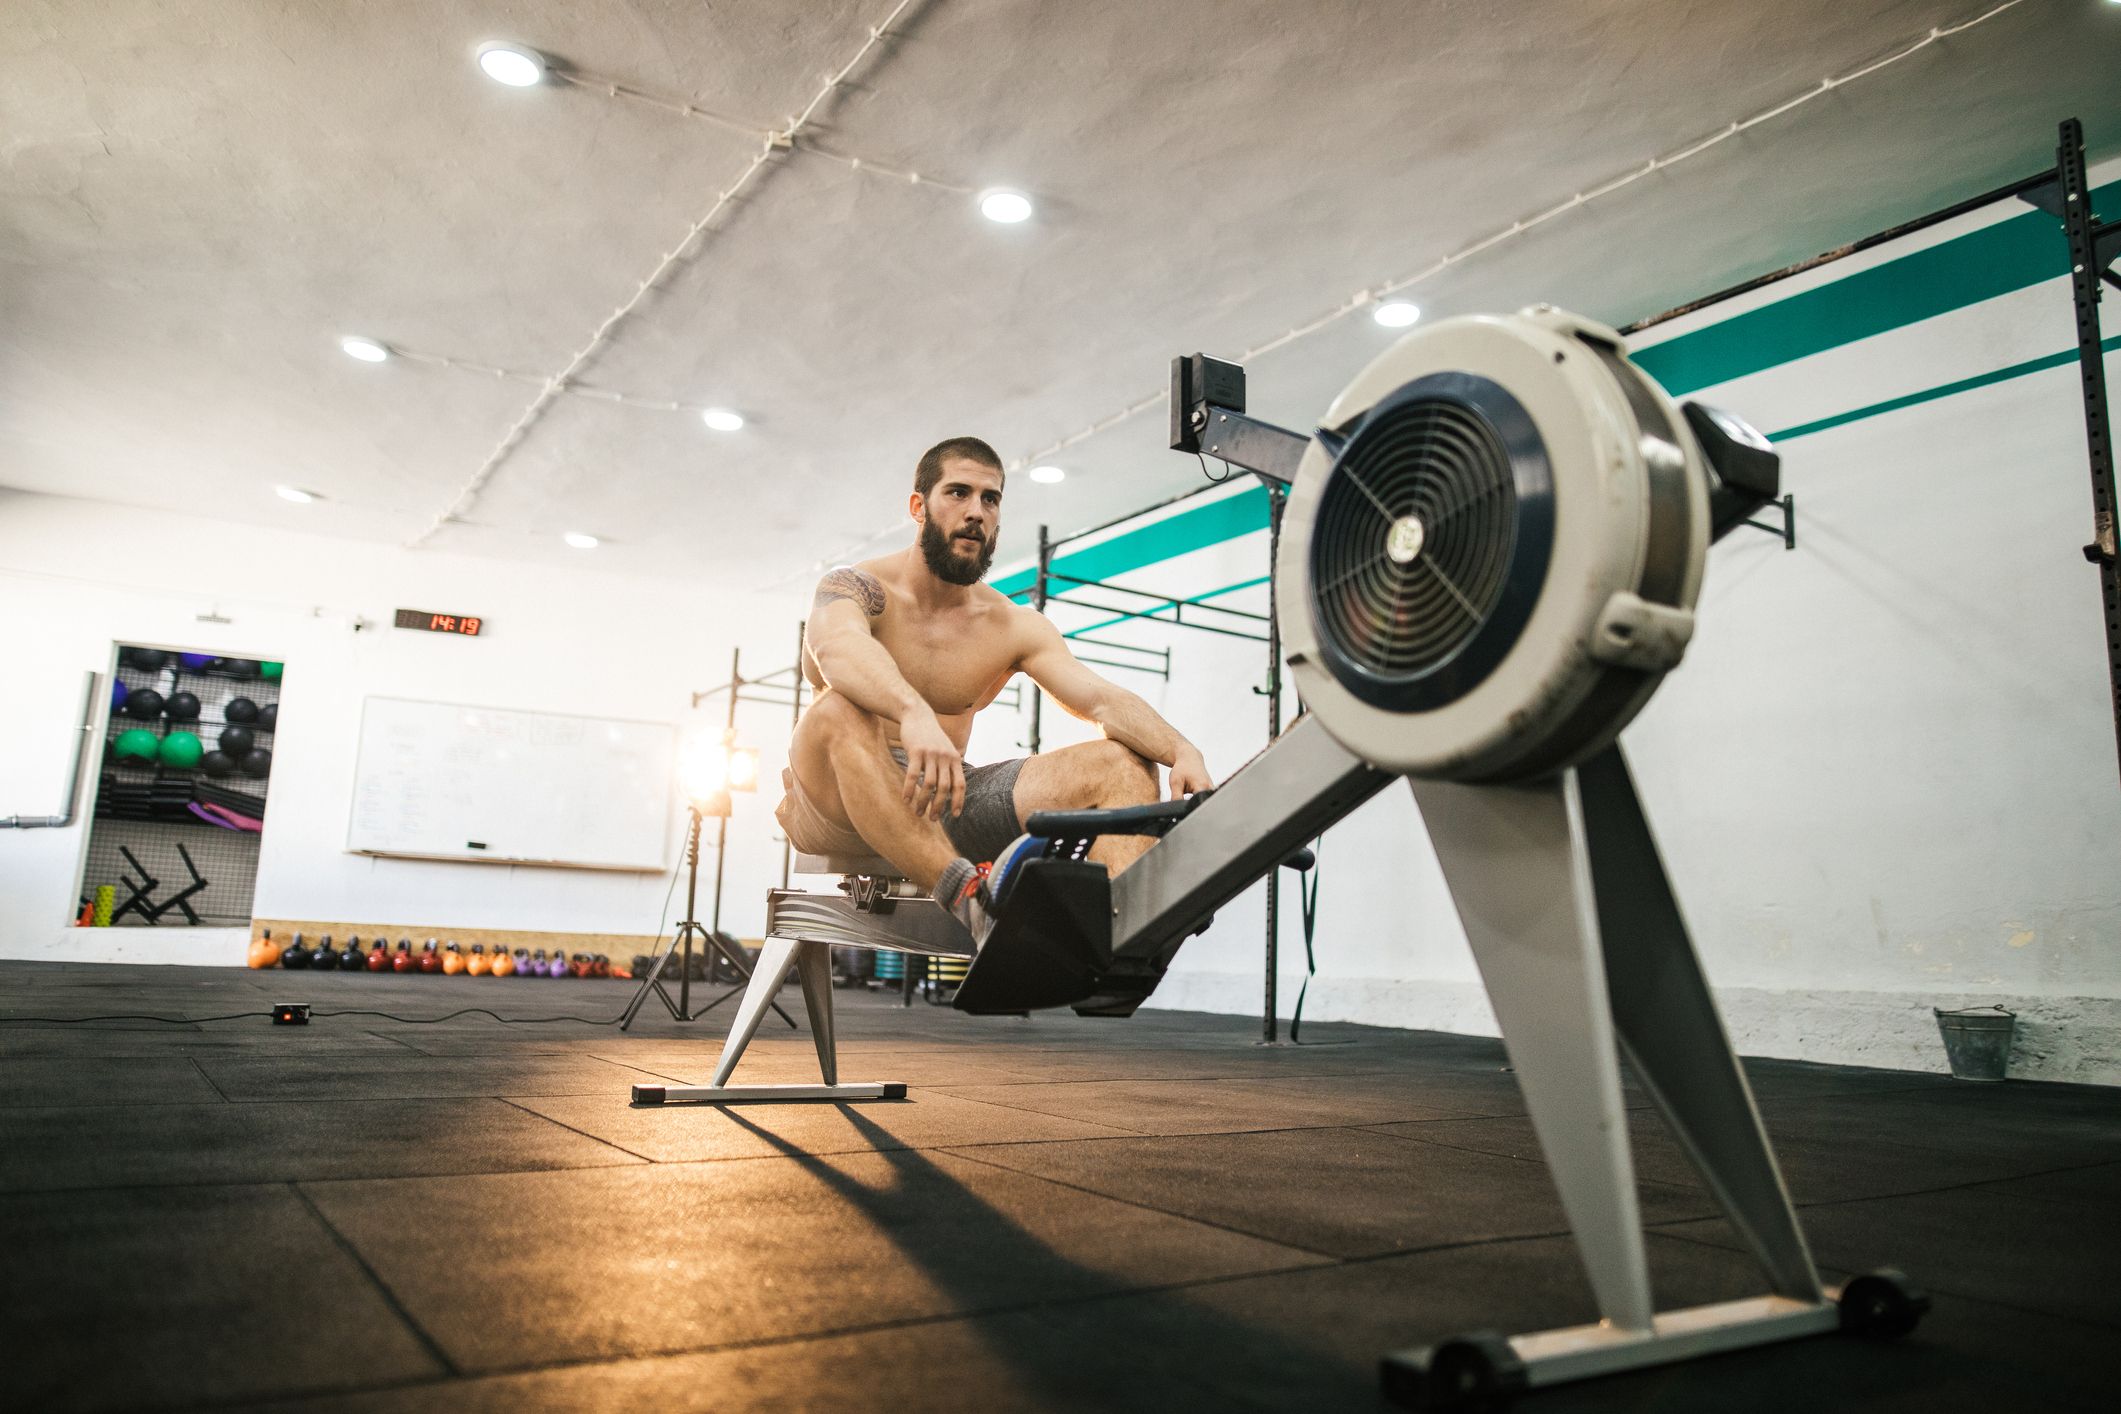 domyos 500 rowing machine review